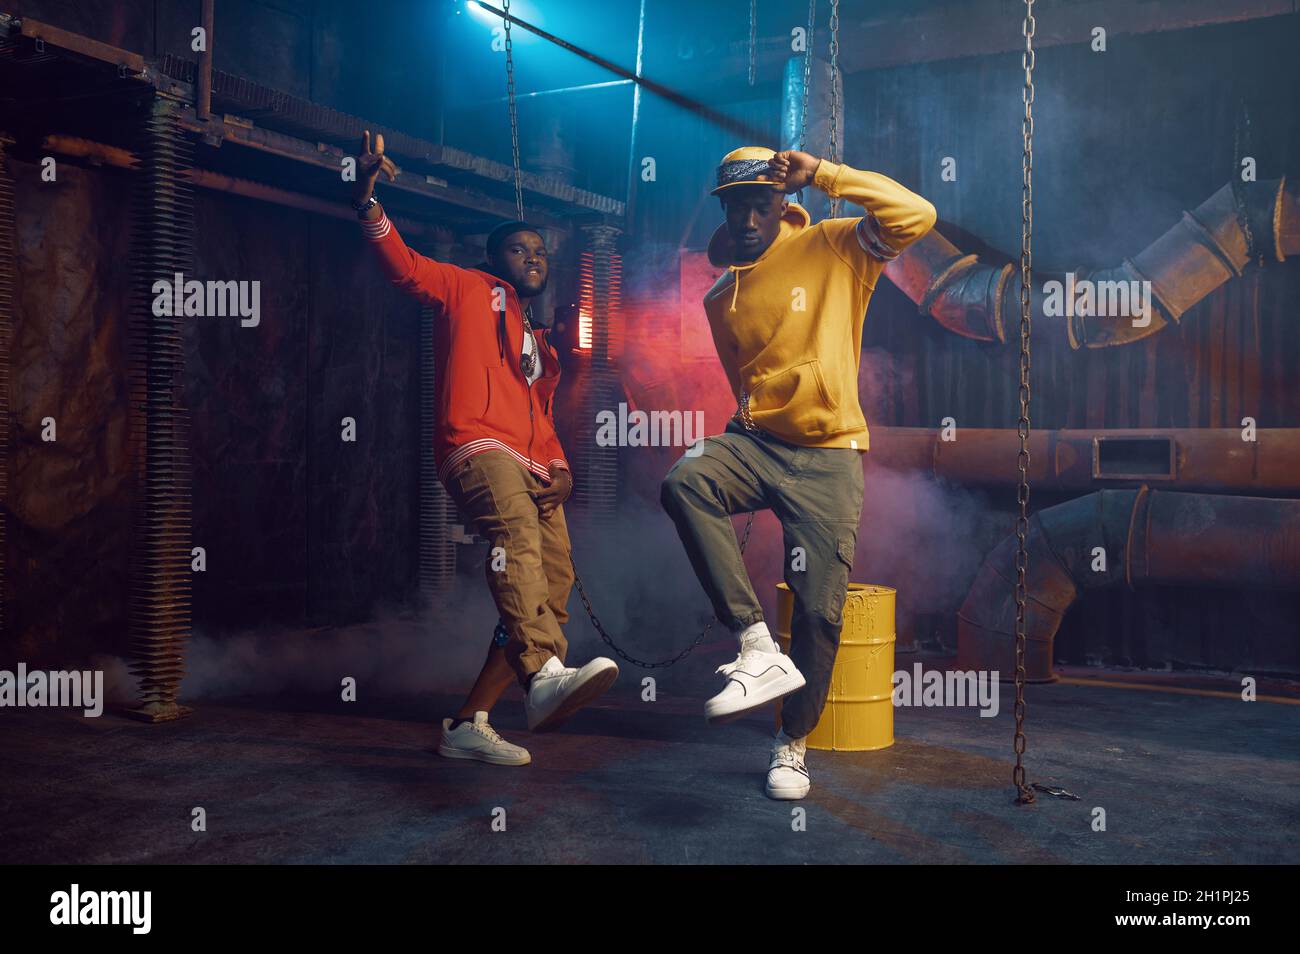 Two stylish rappers, breakdancing in studio with cool underground decoration Stock Photo